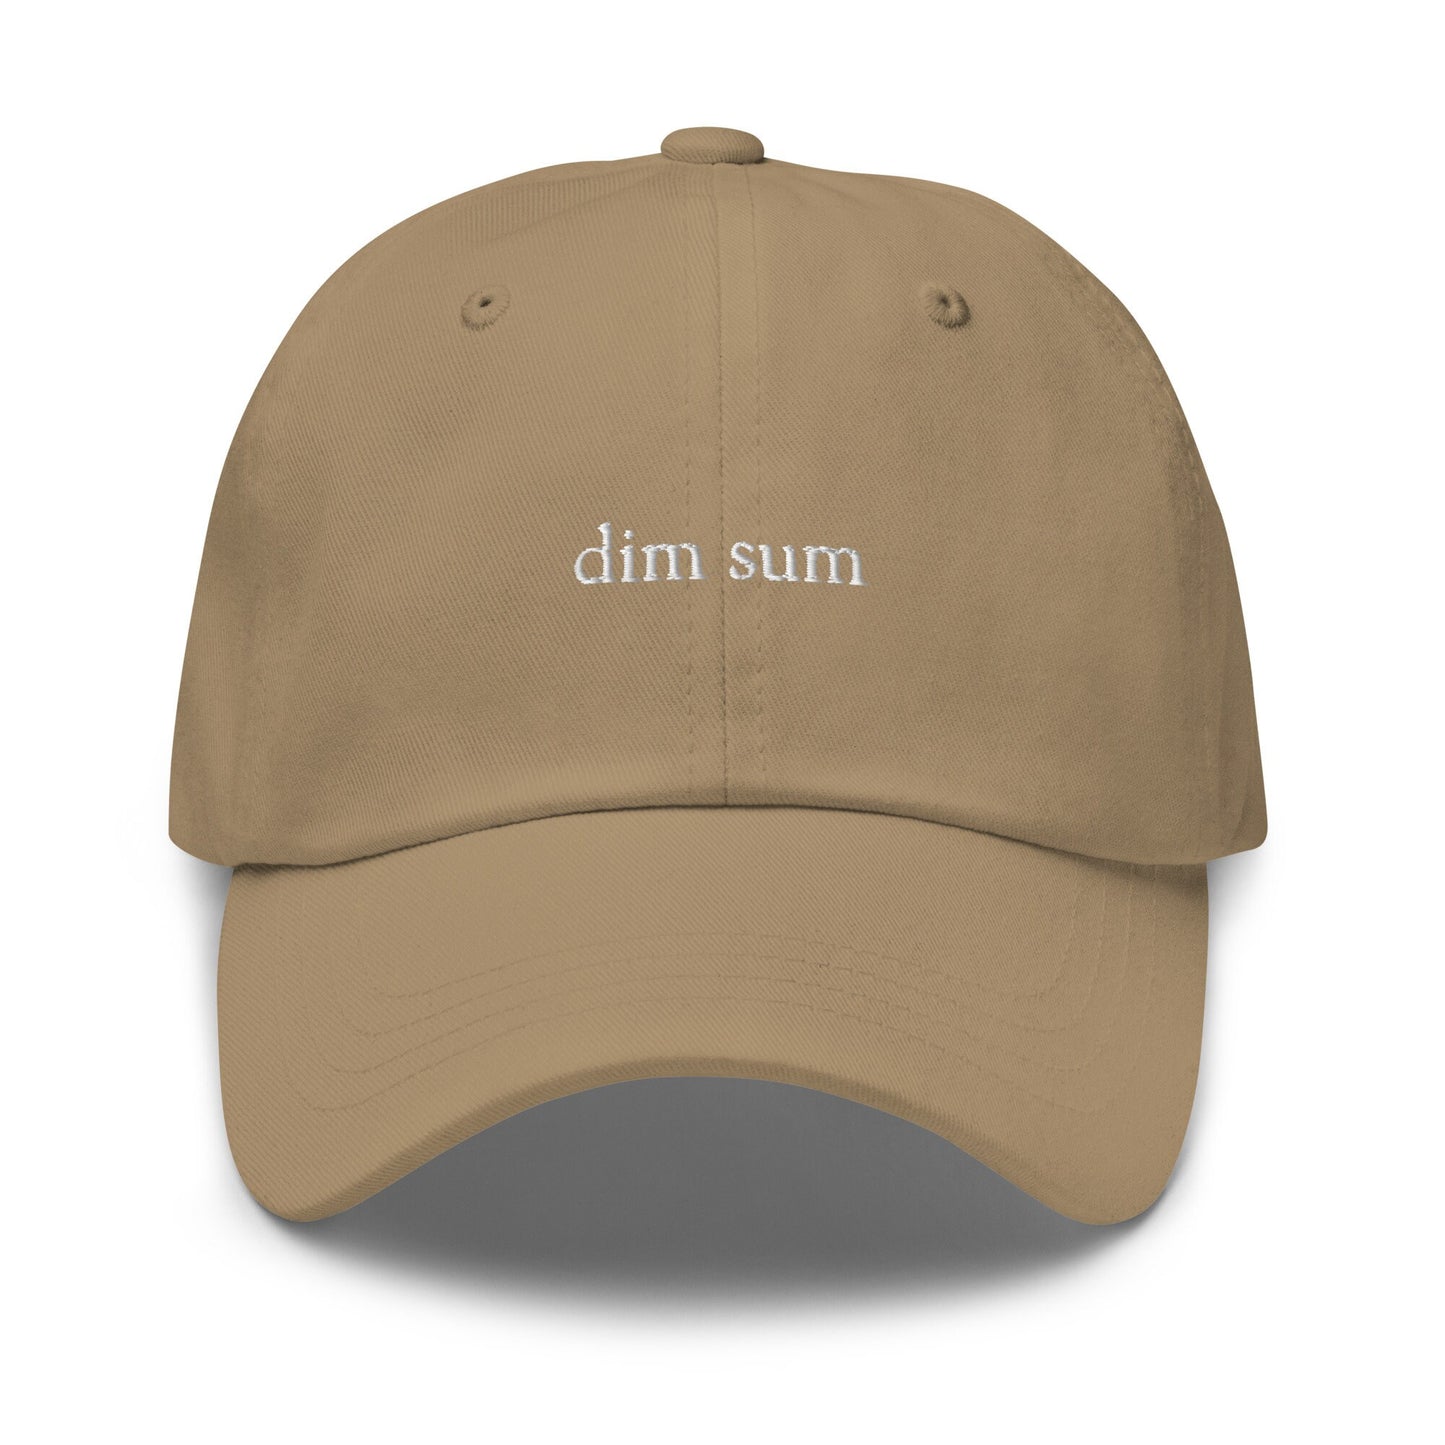 Dim Sum Hat - Chinese Food Lovers Gift - Minimalist Embroidered Cotton Cap